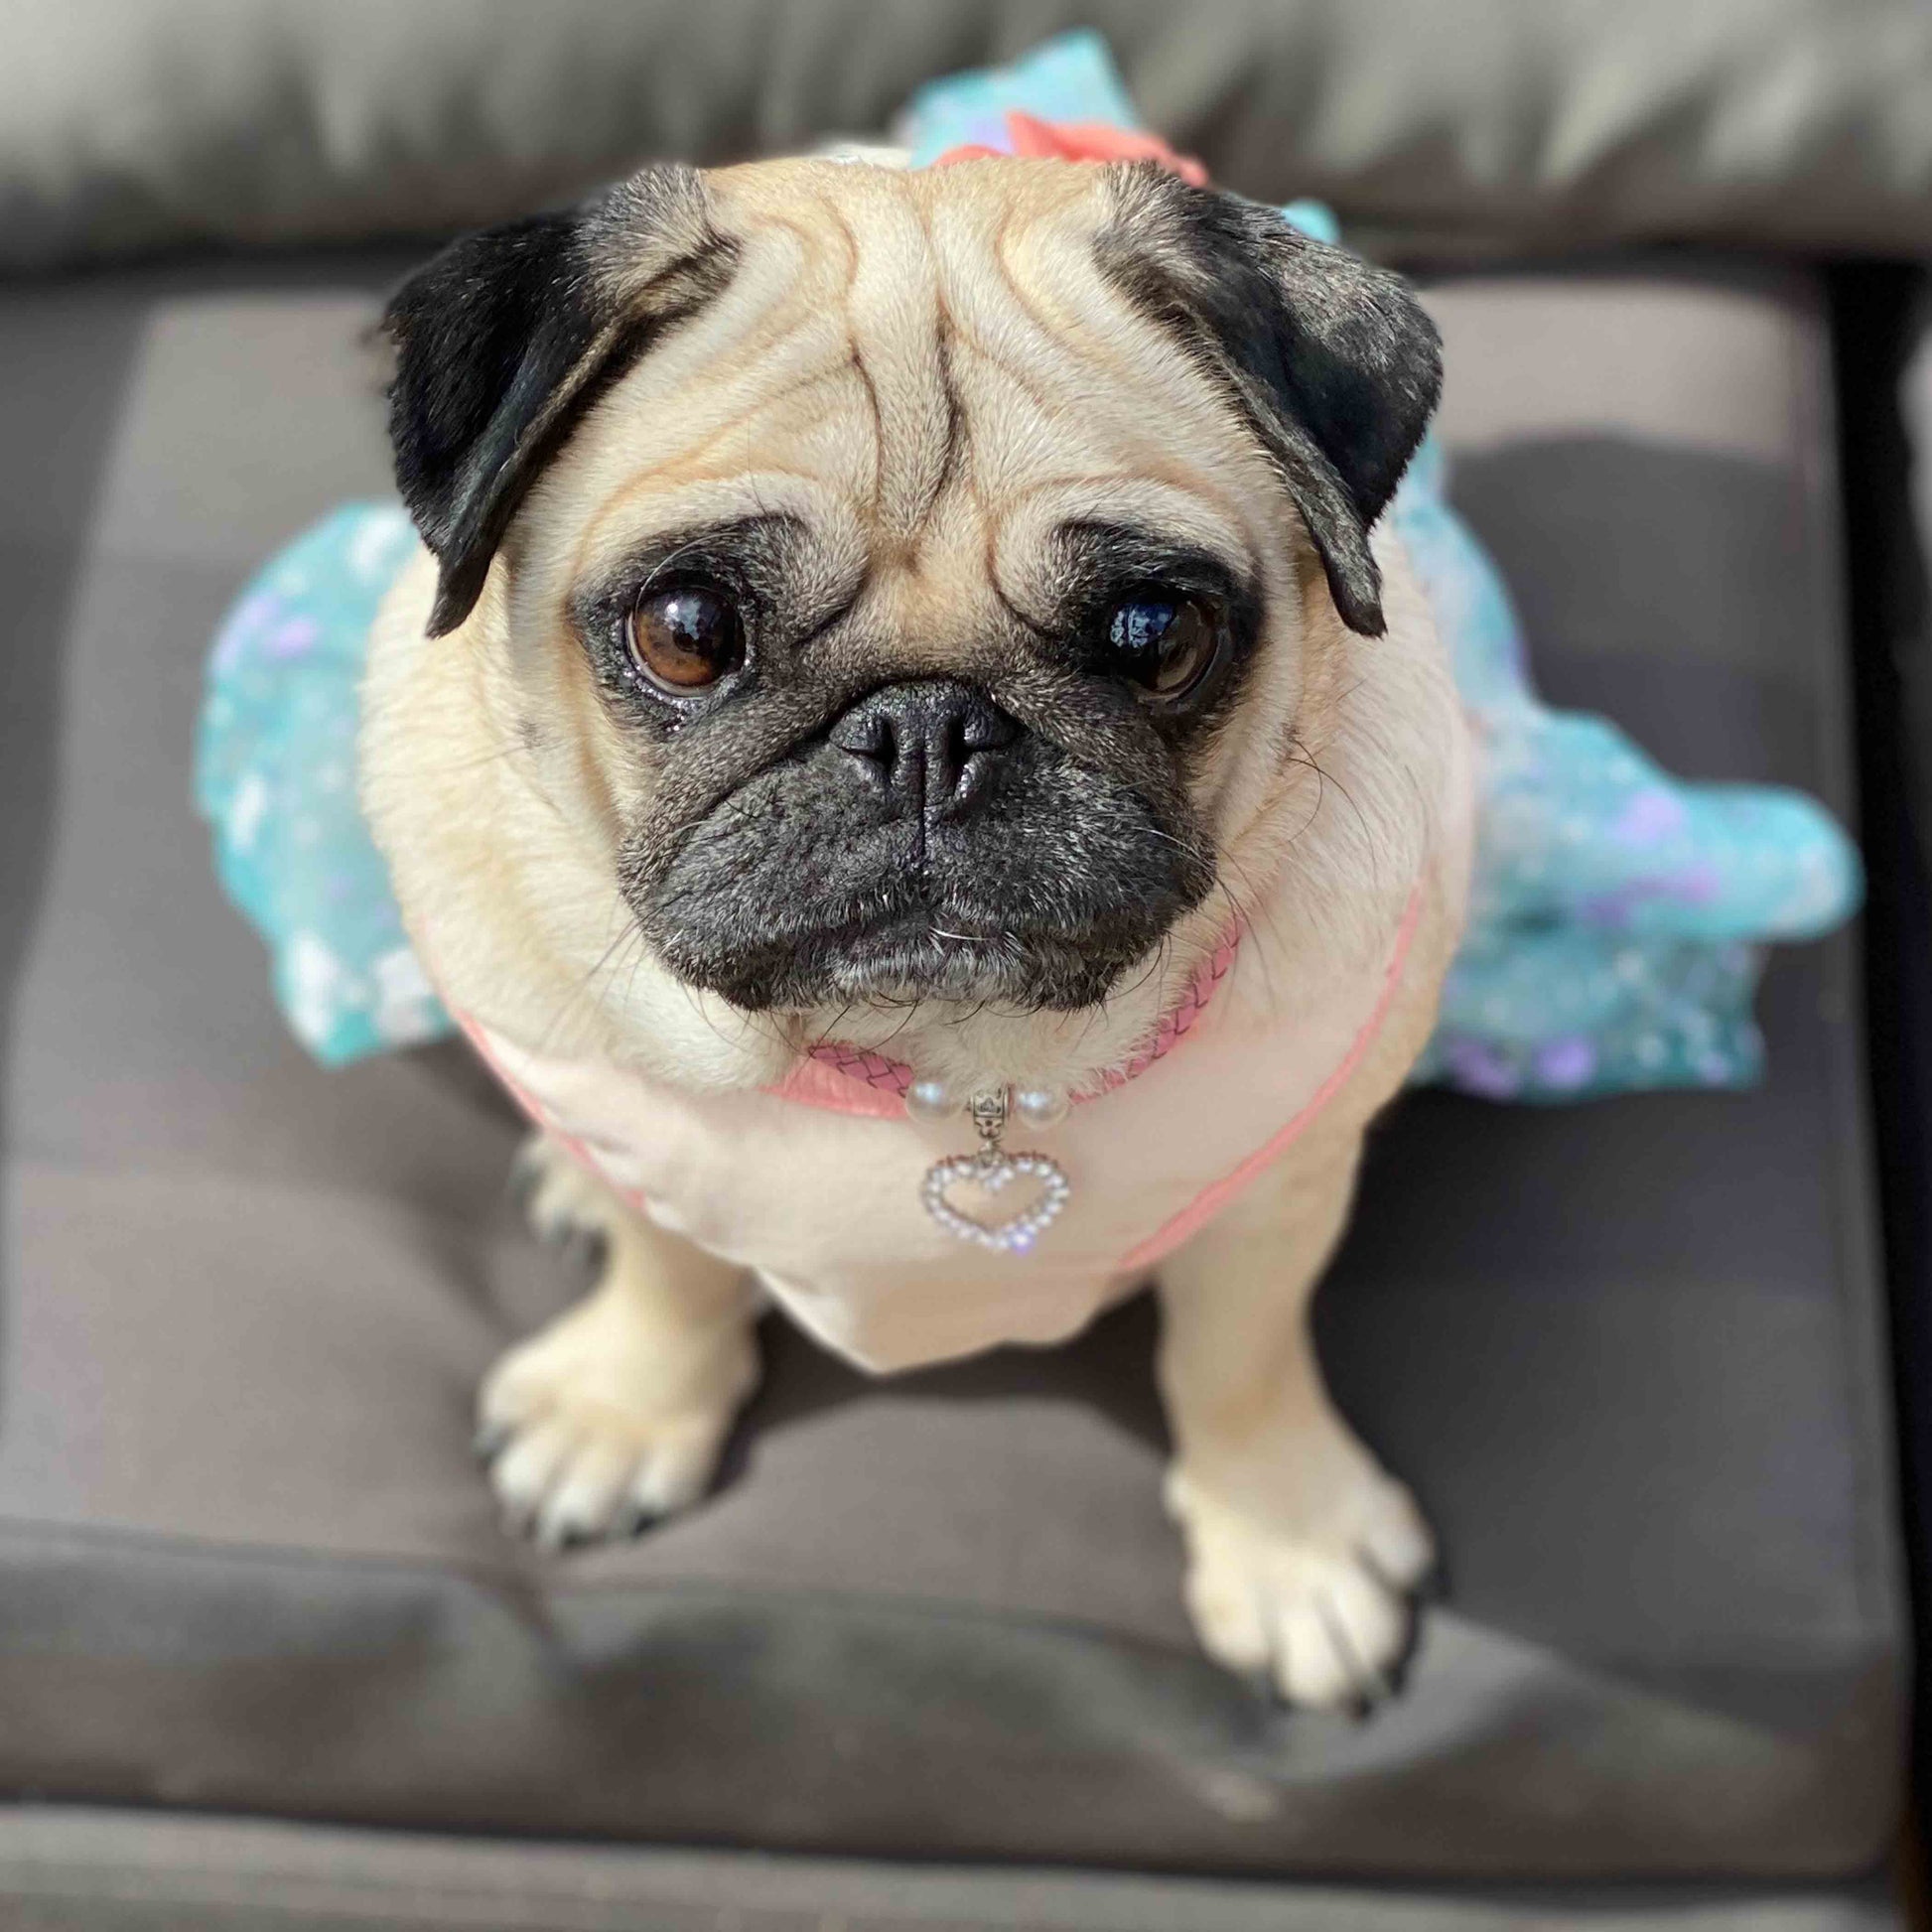 A fawn female pug wearing a Pink Leather Pug Necklace with Rhinestone Heart